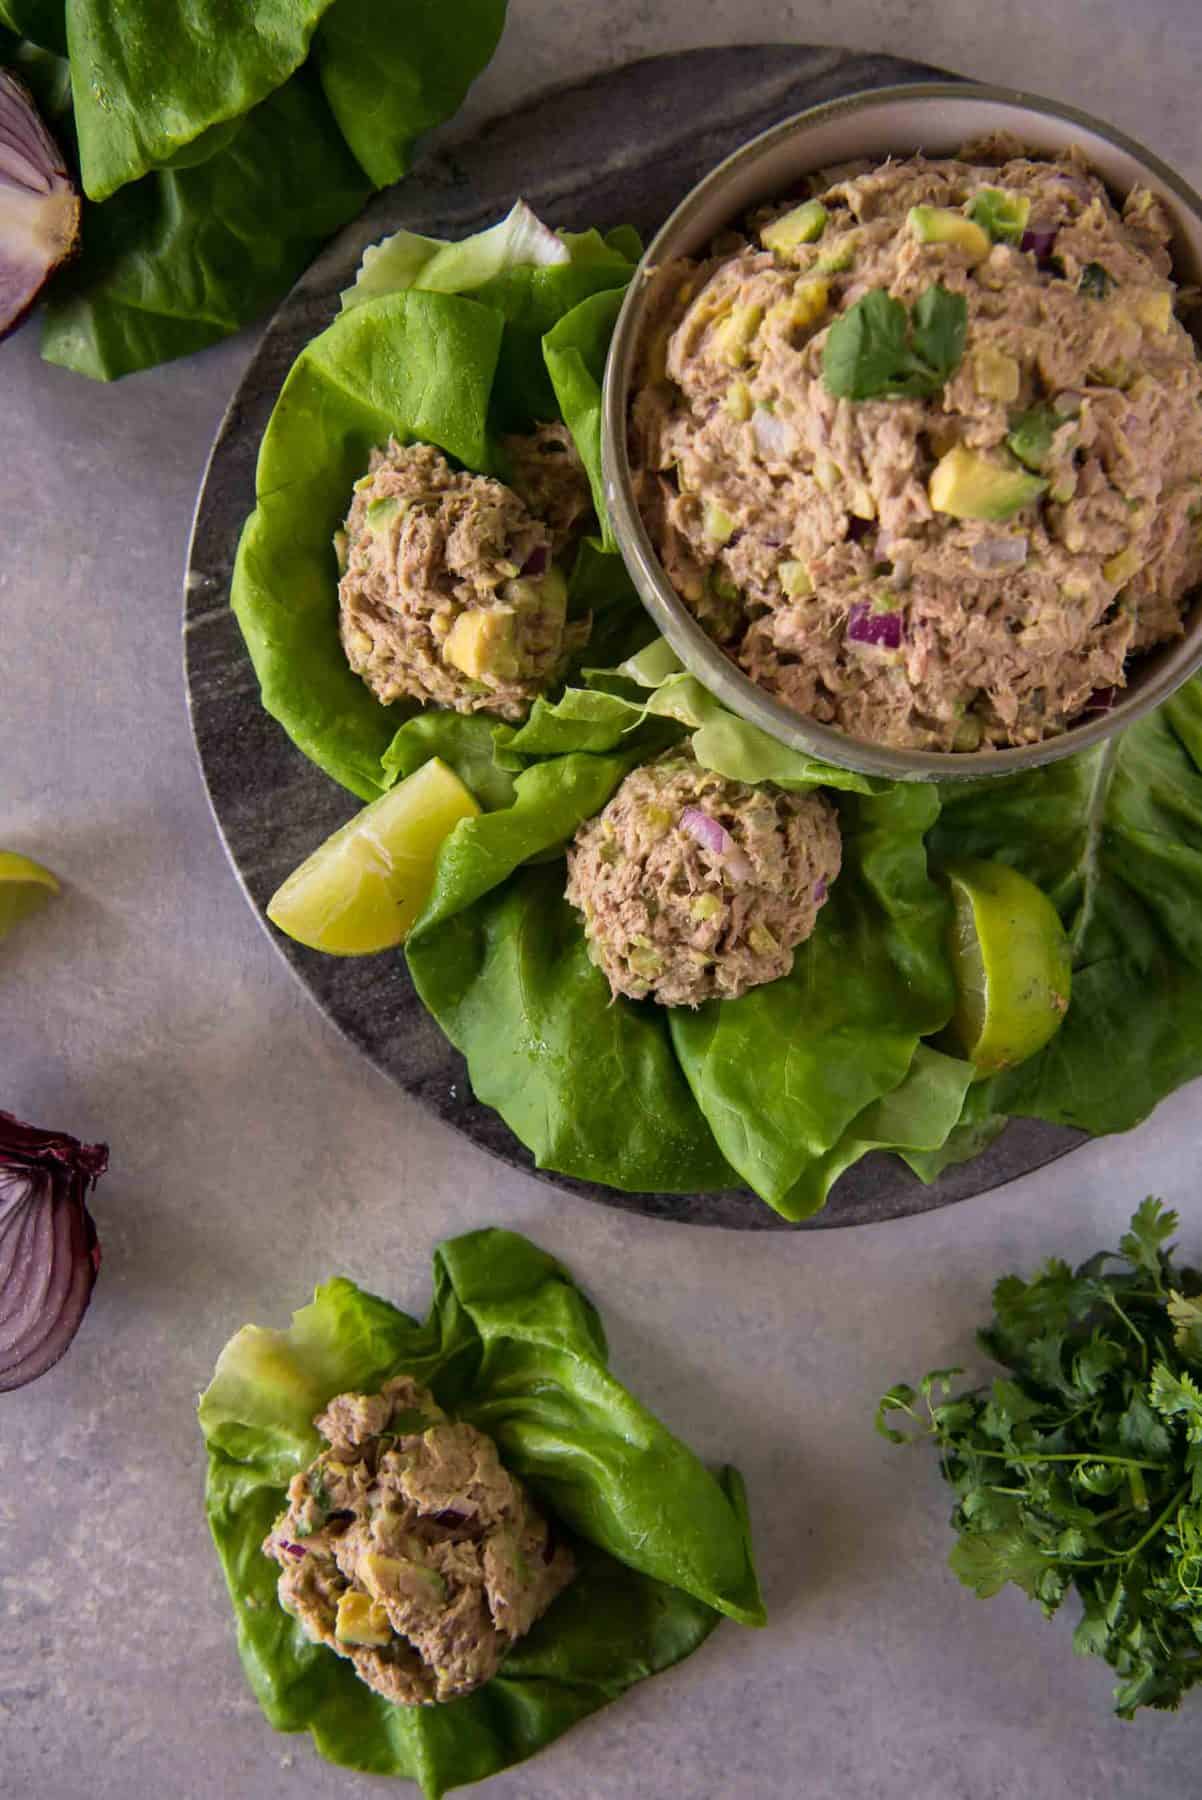 A bowl of avocado tuna salad with scoops on lettuce leaves, garnished with lime wedges and red onion, on a gray surface.